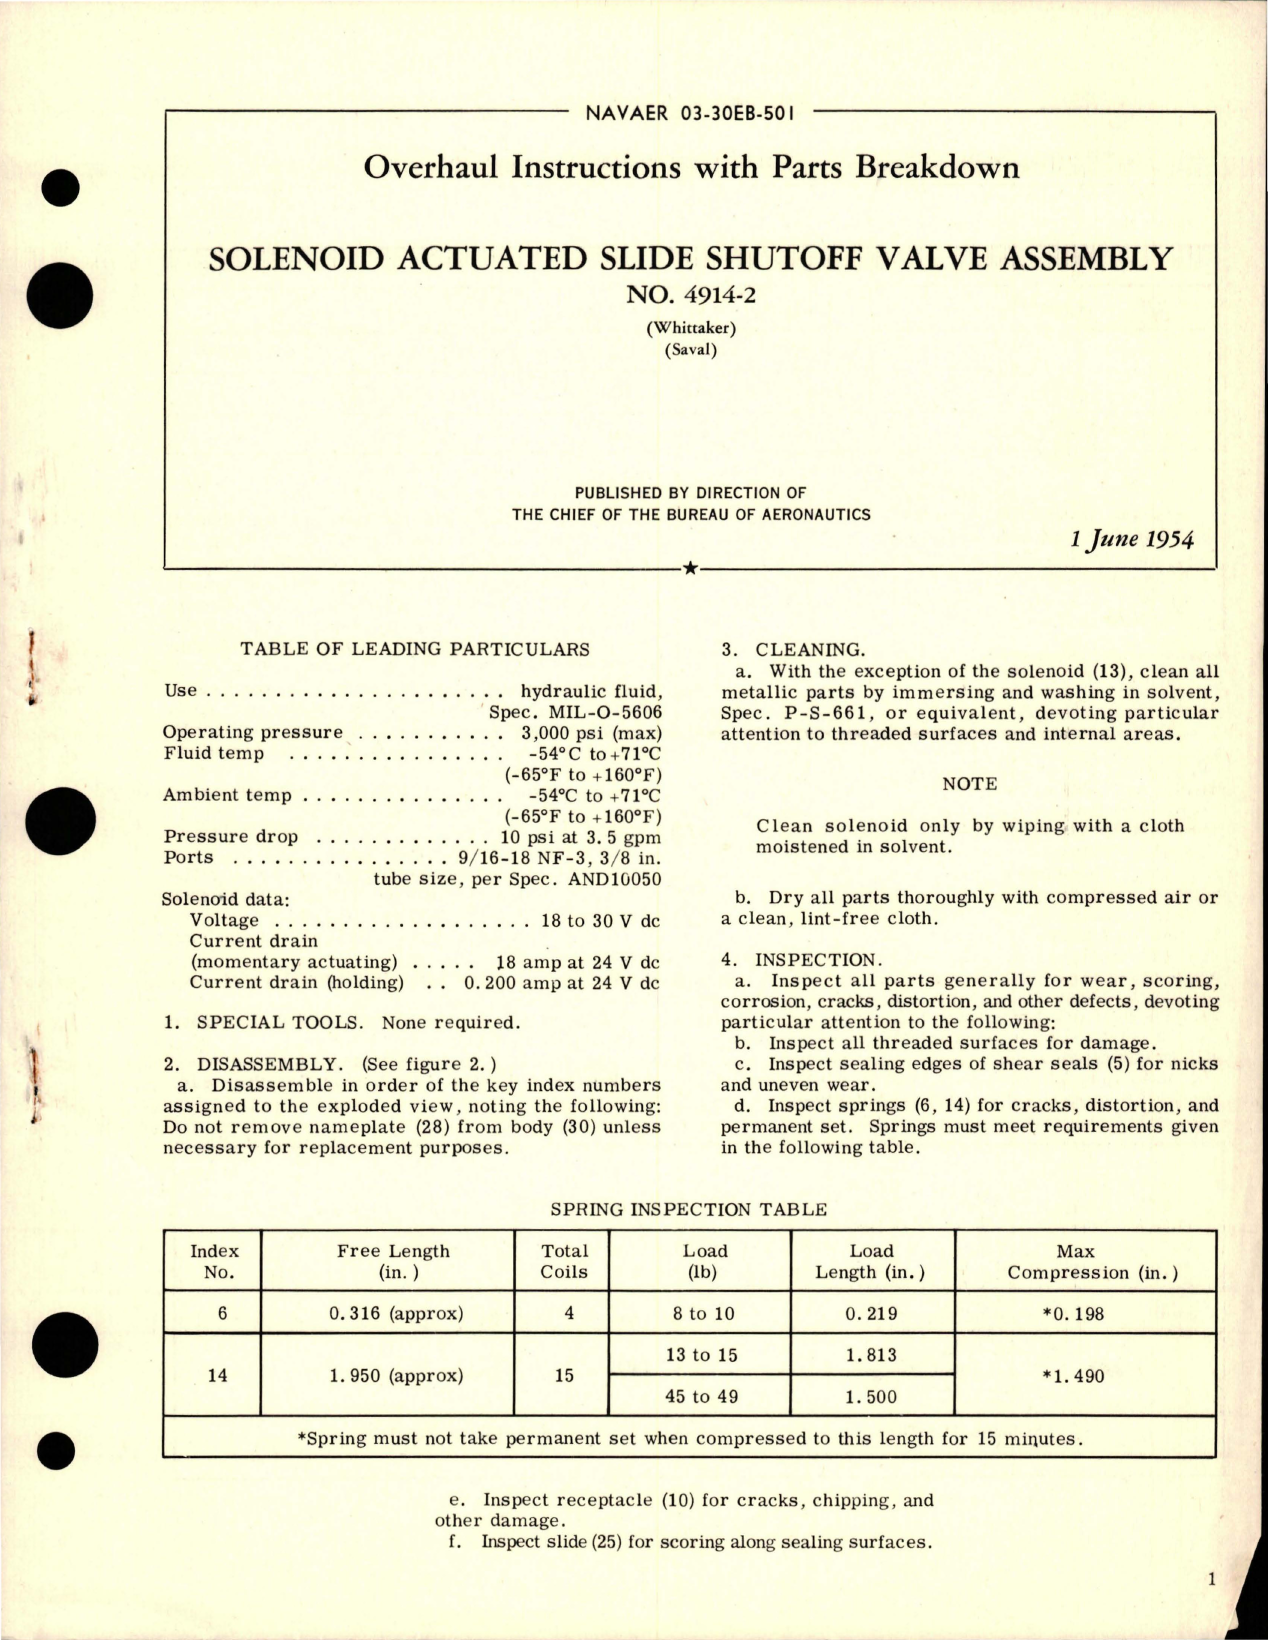 Sample page 1 from AirCorps Library document: Overhaul Instructions with Parts for Solenoid Actuated Slide Shutoff Valve Assembly - No. 4914-2